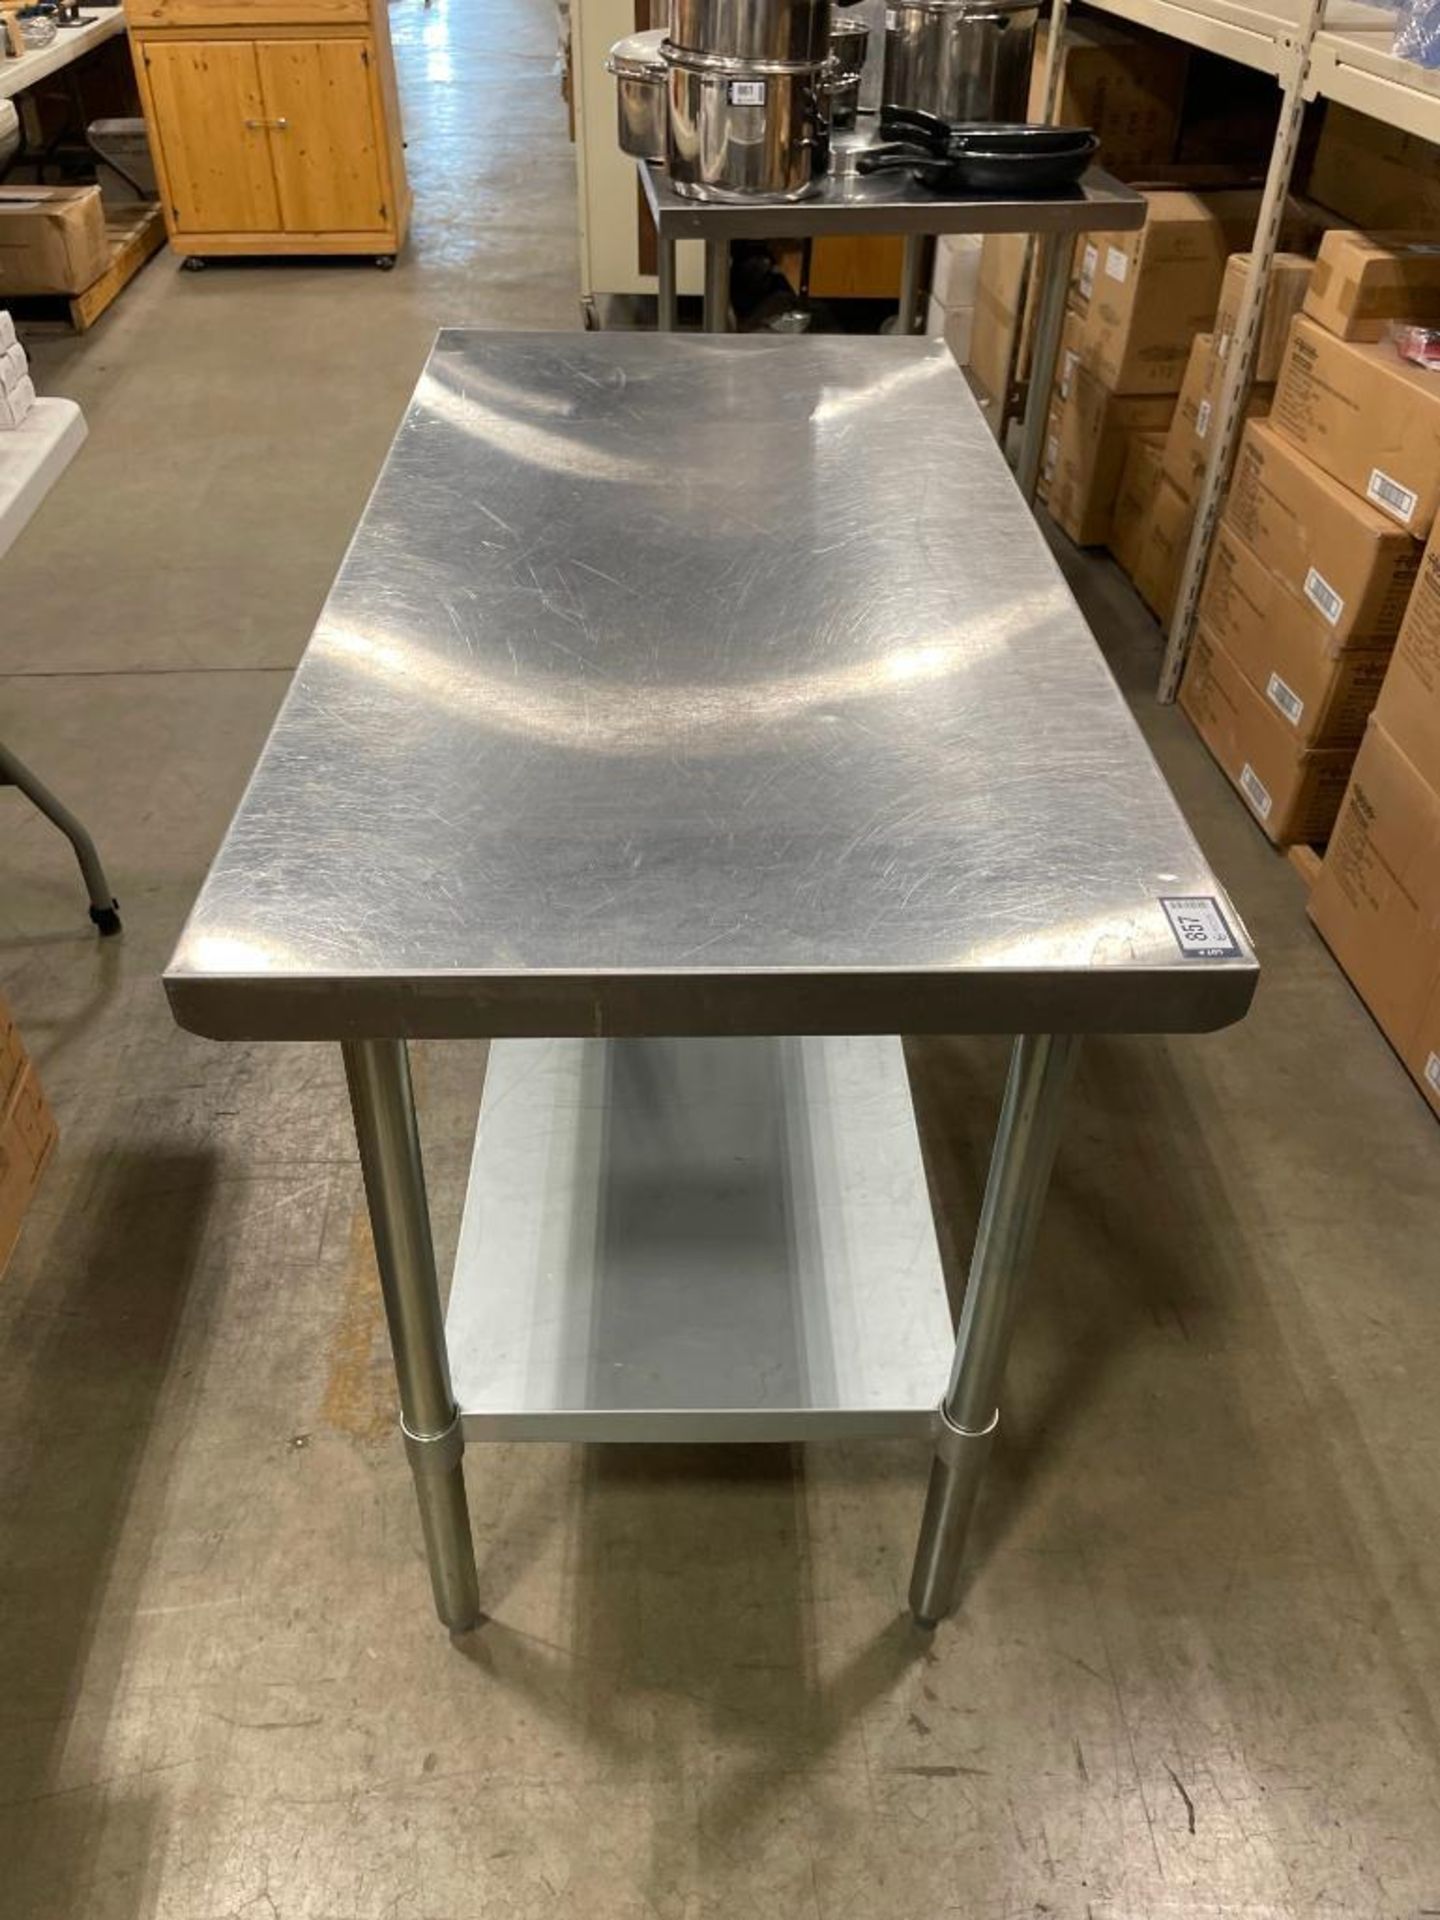 48" X 24" STAINLESS STEEL WORK TABLE - Image 3 of 5